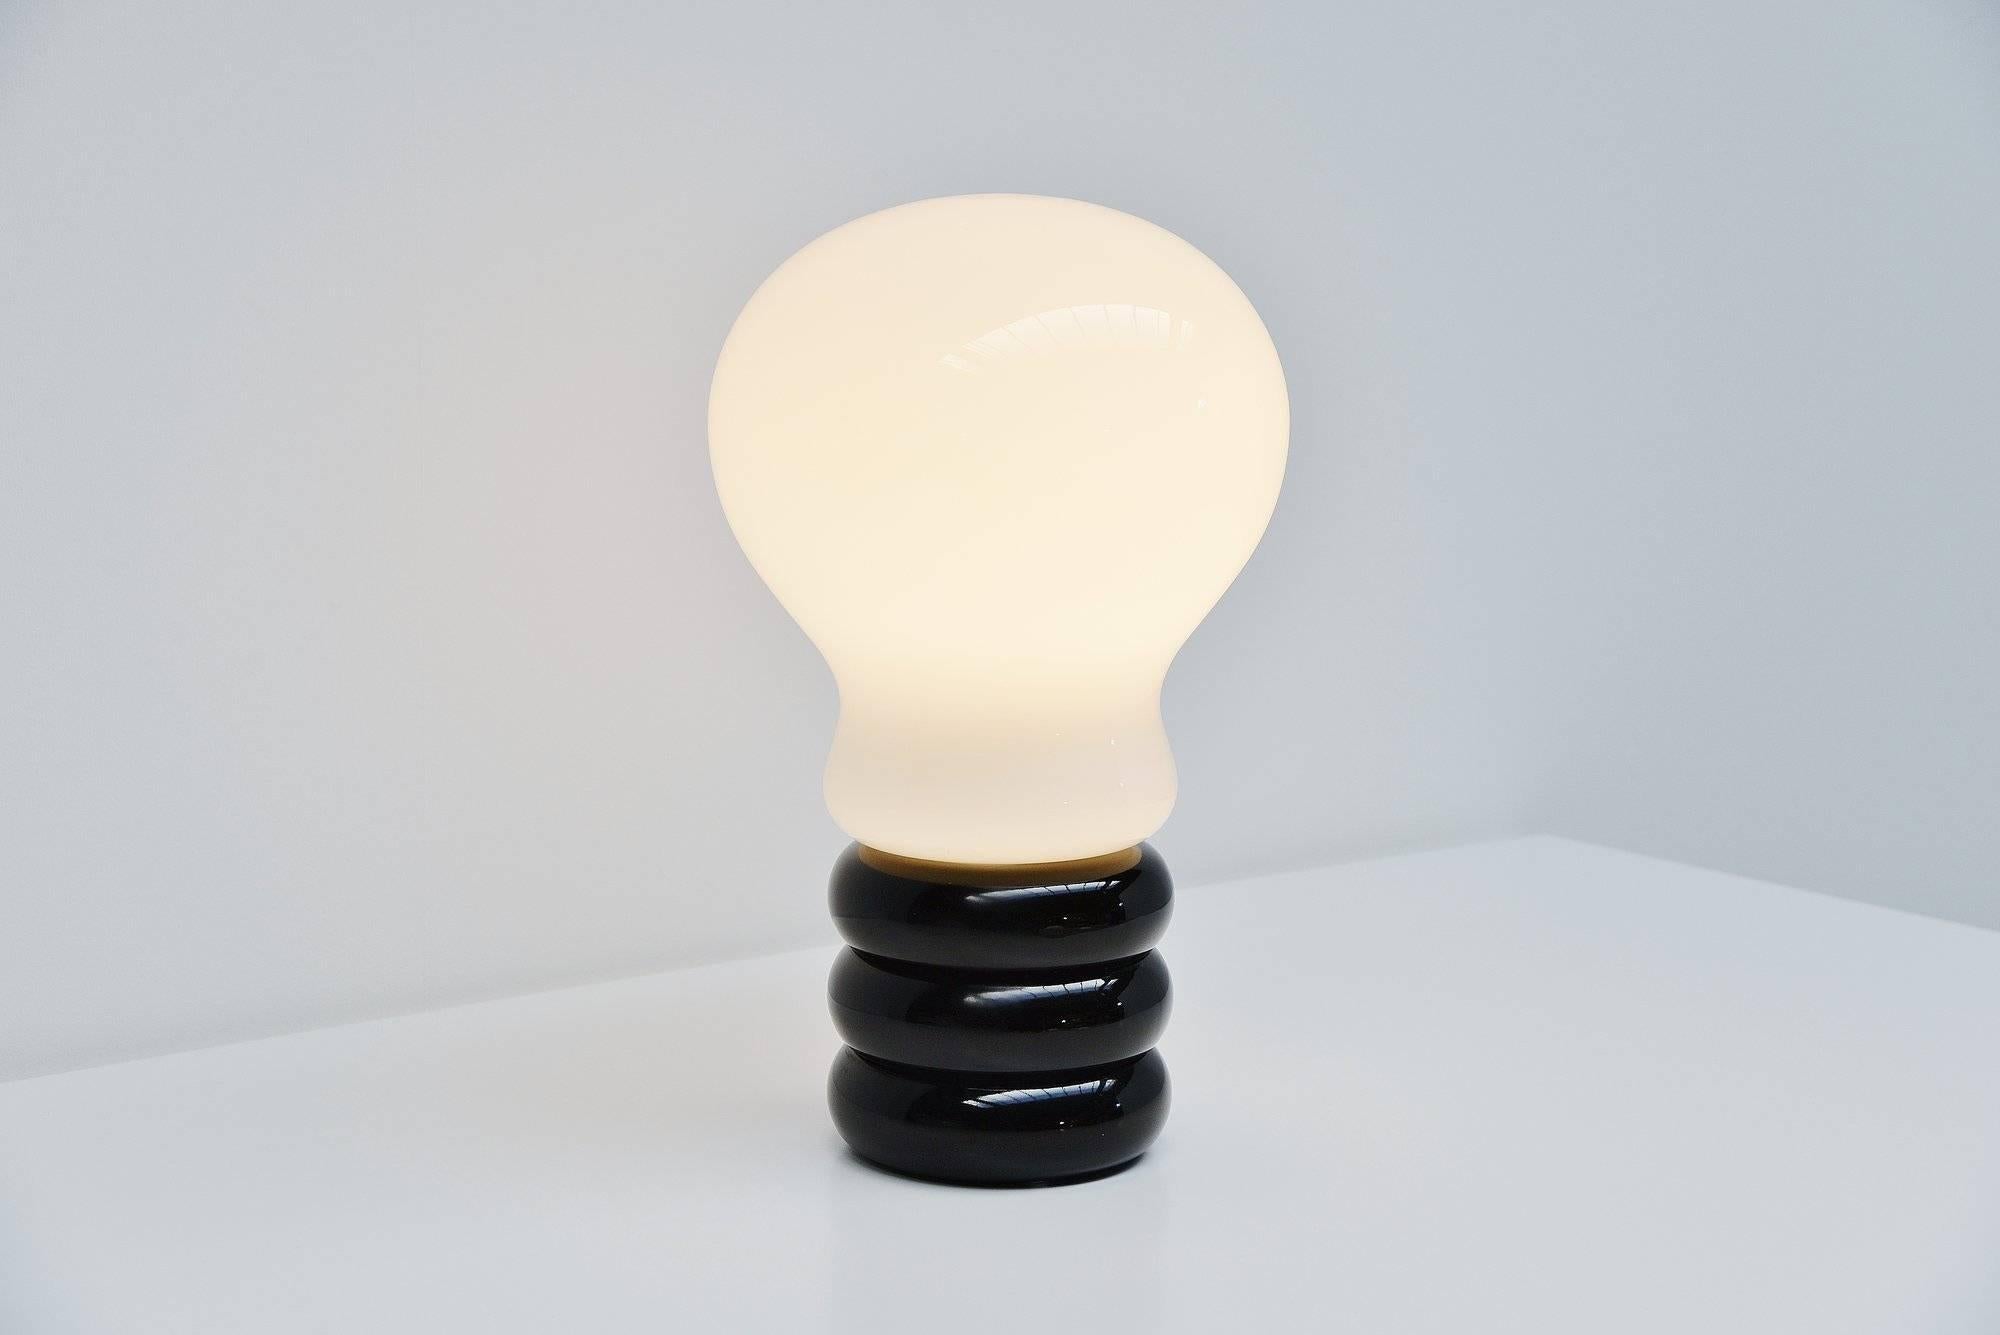 Rare early and large version of the bulb lamp designed by Ingo Maurer, manufactured by M-Design Germany 1966. This lamp has a black painted aluminum base and a white opaline glass shade. This lamp is from the first production and is in very good